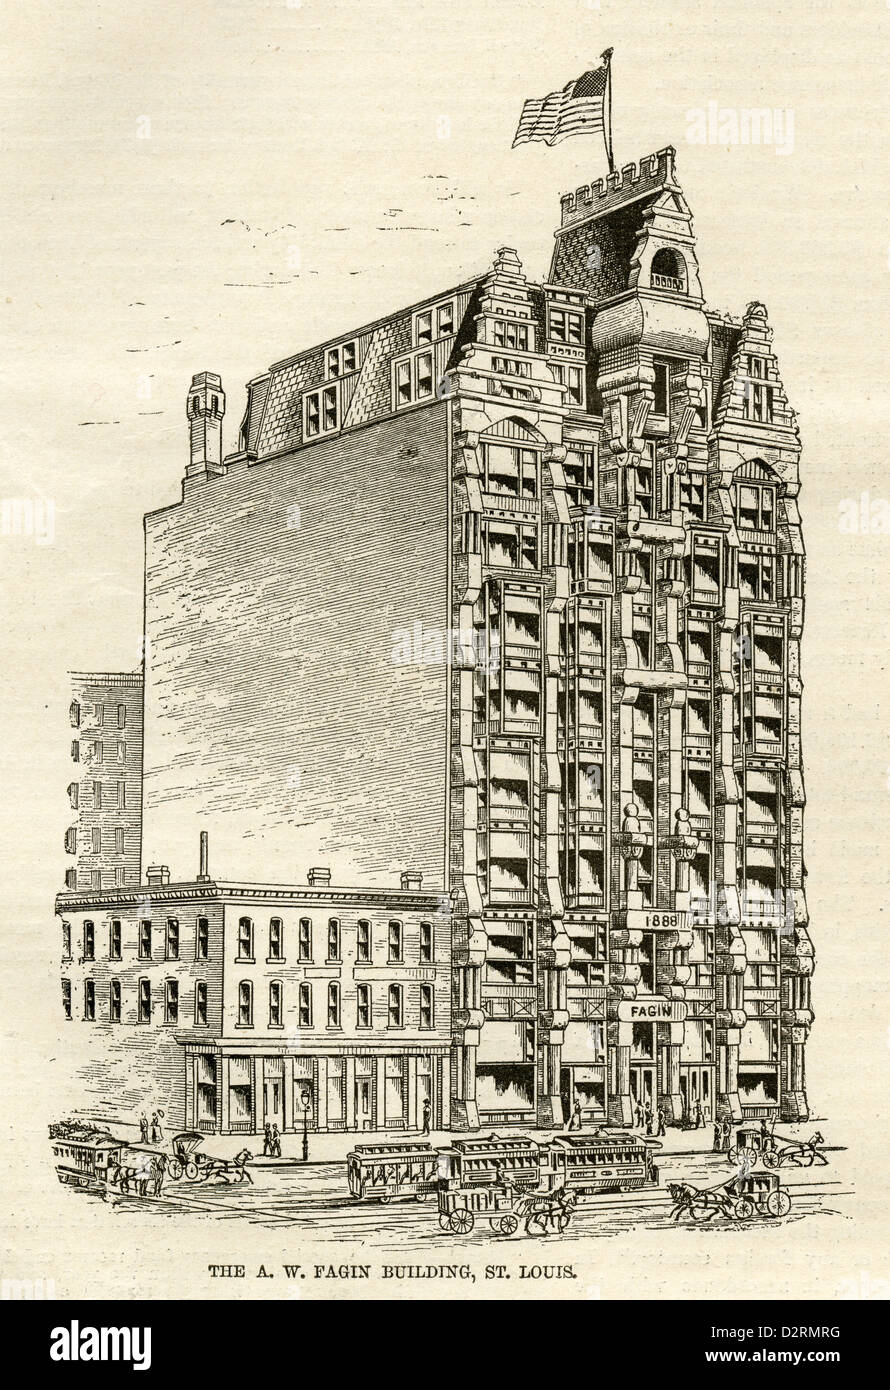 1890 engraving, the A.W. Fagin Building, a very progressive piece of architecture for its time, in St. Louis, Missouri. Stock Photo